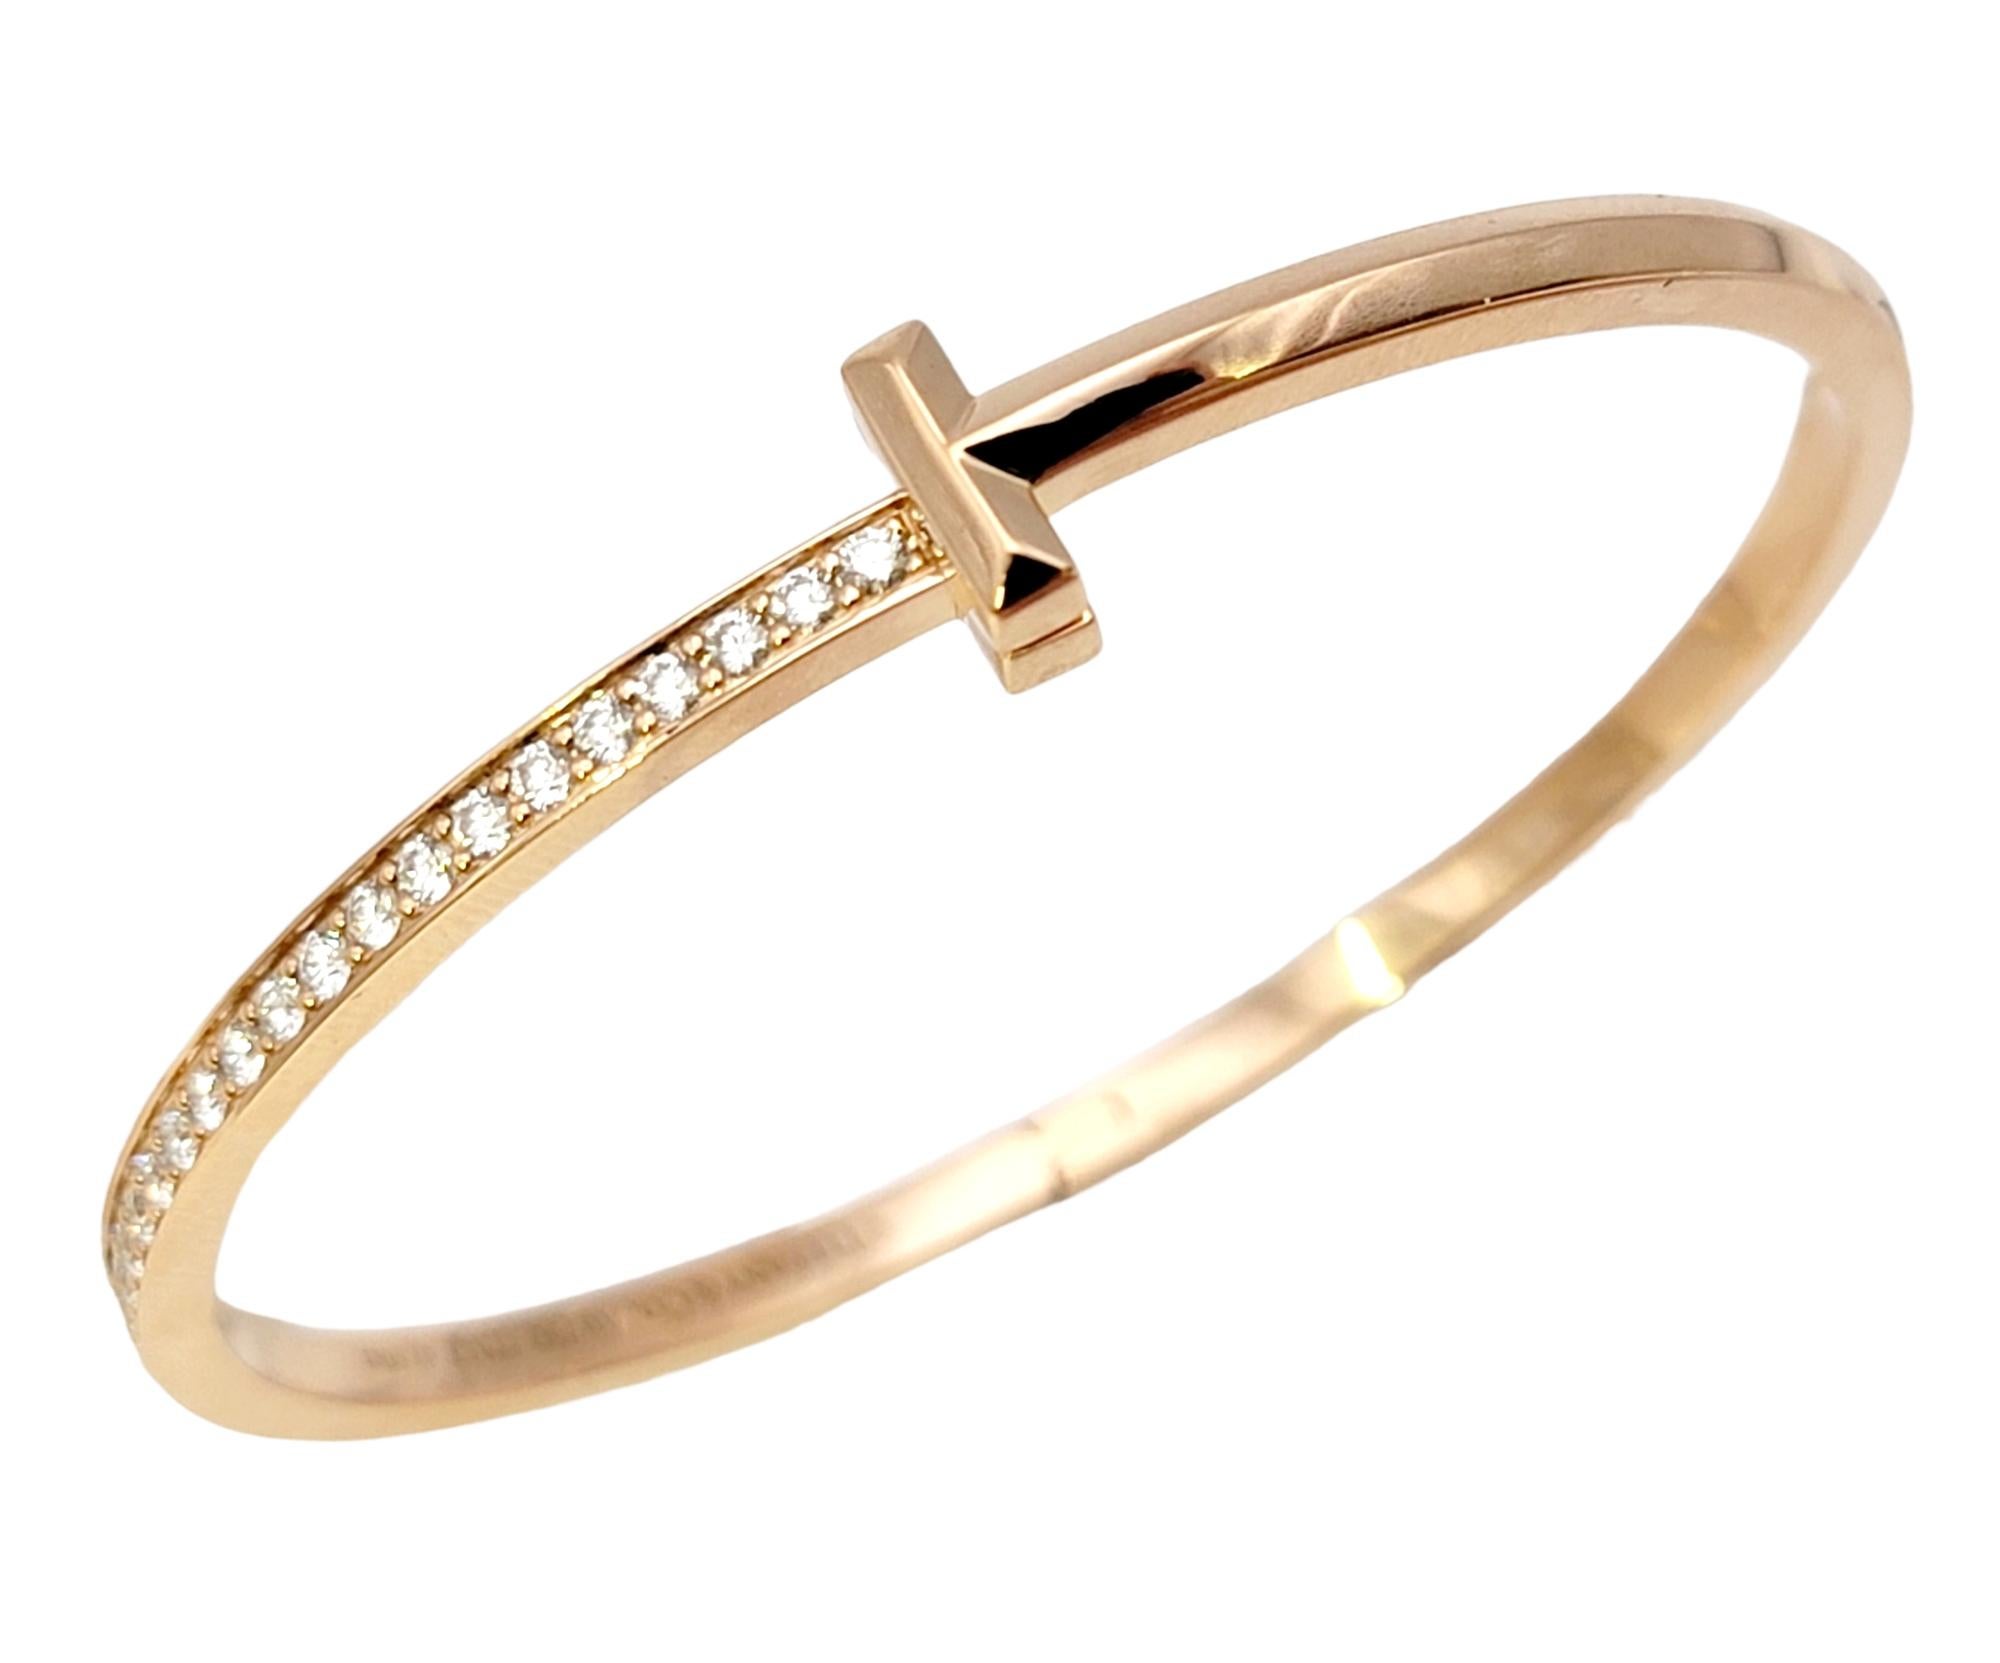 Stunning and sophisticated Tiffany & Co. diamond bangle bracelet from the stylish Tiffany T collection. Crafted with meticulous attention to detail, this luxurious piece exudes timeless beauty and grandeur.

Featuring lustrous rose gold, this